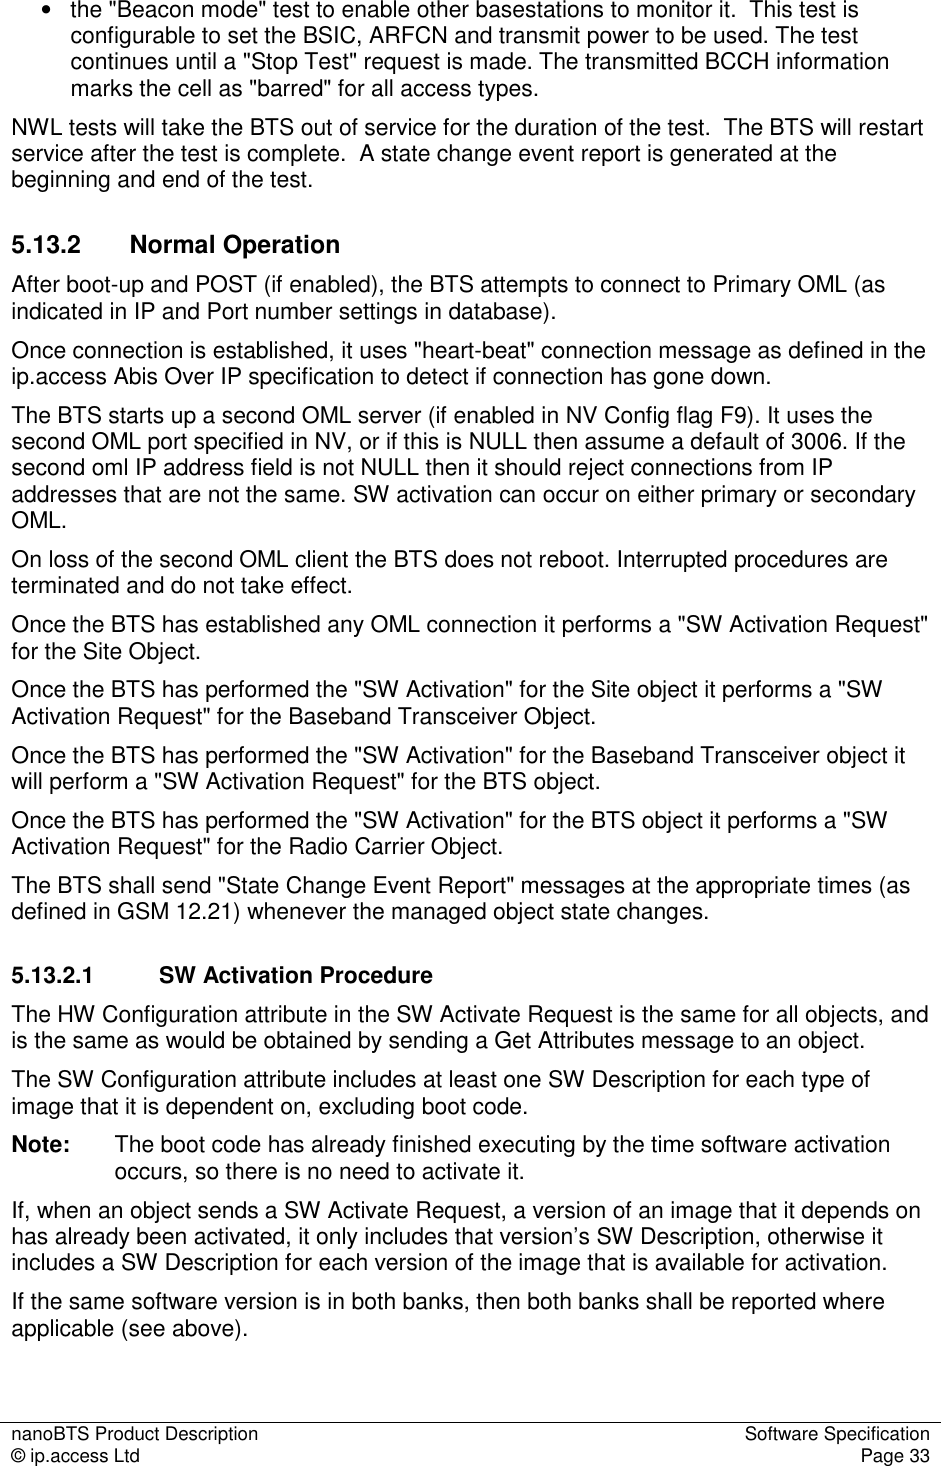 nanoBTS Product Description  Software Specification © ip.access Ltd  Page 33  •  the &quot;Beacon mode&quot; test to enable other basestations to monitor it.  This test is configurable to set the BSIC, ARFCN and transmit power to be used. The test continues until a &quot;Stop Test&quot; request is made. The transmitted BCCH information marks the cell as &quot;barred&quot; for all access types. NWL tests will take the BTS out of service for the duration of the test.  The BTS will restart service after the test is complete.  A state change event report is generated at the beginning and end of the test. 5.13.2  Normal Operation After boot-up and POST (if enabled), the BTS attempts to connect to Primary OML (as indicated in IP and Port number settings in database). Once connection is established, it uses &quot;heart-beat&quot; connection message as defined in the ip.access Abis Over IP specification to detect if connection has gone down. The BTS starts up a second OML server (if enabled in NV Config flag F9). It uses the second OML port specified in NV, or if this is NULL then assume a default of 3006. If the second oml IP address field is not NULL then it should reject connections from IP addresses that are not the same. SW activation can occur on either primary or secondary OML. On loss of the second OML client the BTS does not reboot. Interrupted procedures are terminated and do not take effect. Once the BTS has established any OML connection it performs a &quot;SW Activation Request&quot; for the Site Object. Once the BTS has performed the &quot;SW Activation&quot; for the Site object it performs a &quot;SW Activation Request&quot; for the Baseband Transceiver Object. Once the BTS has performed the &quot;SW Activation&quot; for the Baseband Transceiver object it will perform a &quot;SW Activation Request&quot; for the BTS object. Once the BTS has performed the &quot;SW Activation&quot; for the BTS object it performs a &quot;SW Activation Request&quot; for the Radio Carrier Object. The BTS shall send &quot;State Change Event Report&quot; messages at the appropriate times (as defined in GSM 12.21) whenever the managed object state changes. 5.13.2.1  SW Activation Procedure The HW Configuration attribute in the SW Activate Request is the same for all objects, and is the same as would be obtained by sending a Get Attributes message to an object. The SW Configuration attribute includes at least one SW Description for each type of image that it is dependent on, excluding boot code. Note:  The boot code has already finished executing by the time software activation occurs, so there is no need to activate it. If, when an object sends a SW Activate Request, a version of an image that it depends on has already been activated, it only includes that version’s SW Description, otherwise it includes a SW Description for each version of the image that is available for activation.  If the same software version is in both banks, then both banks shall be reported where applicable (see above). 